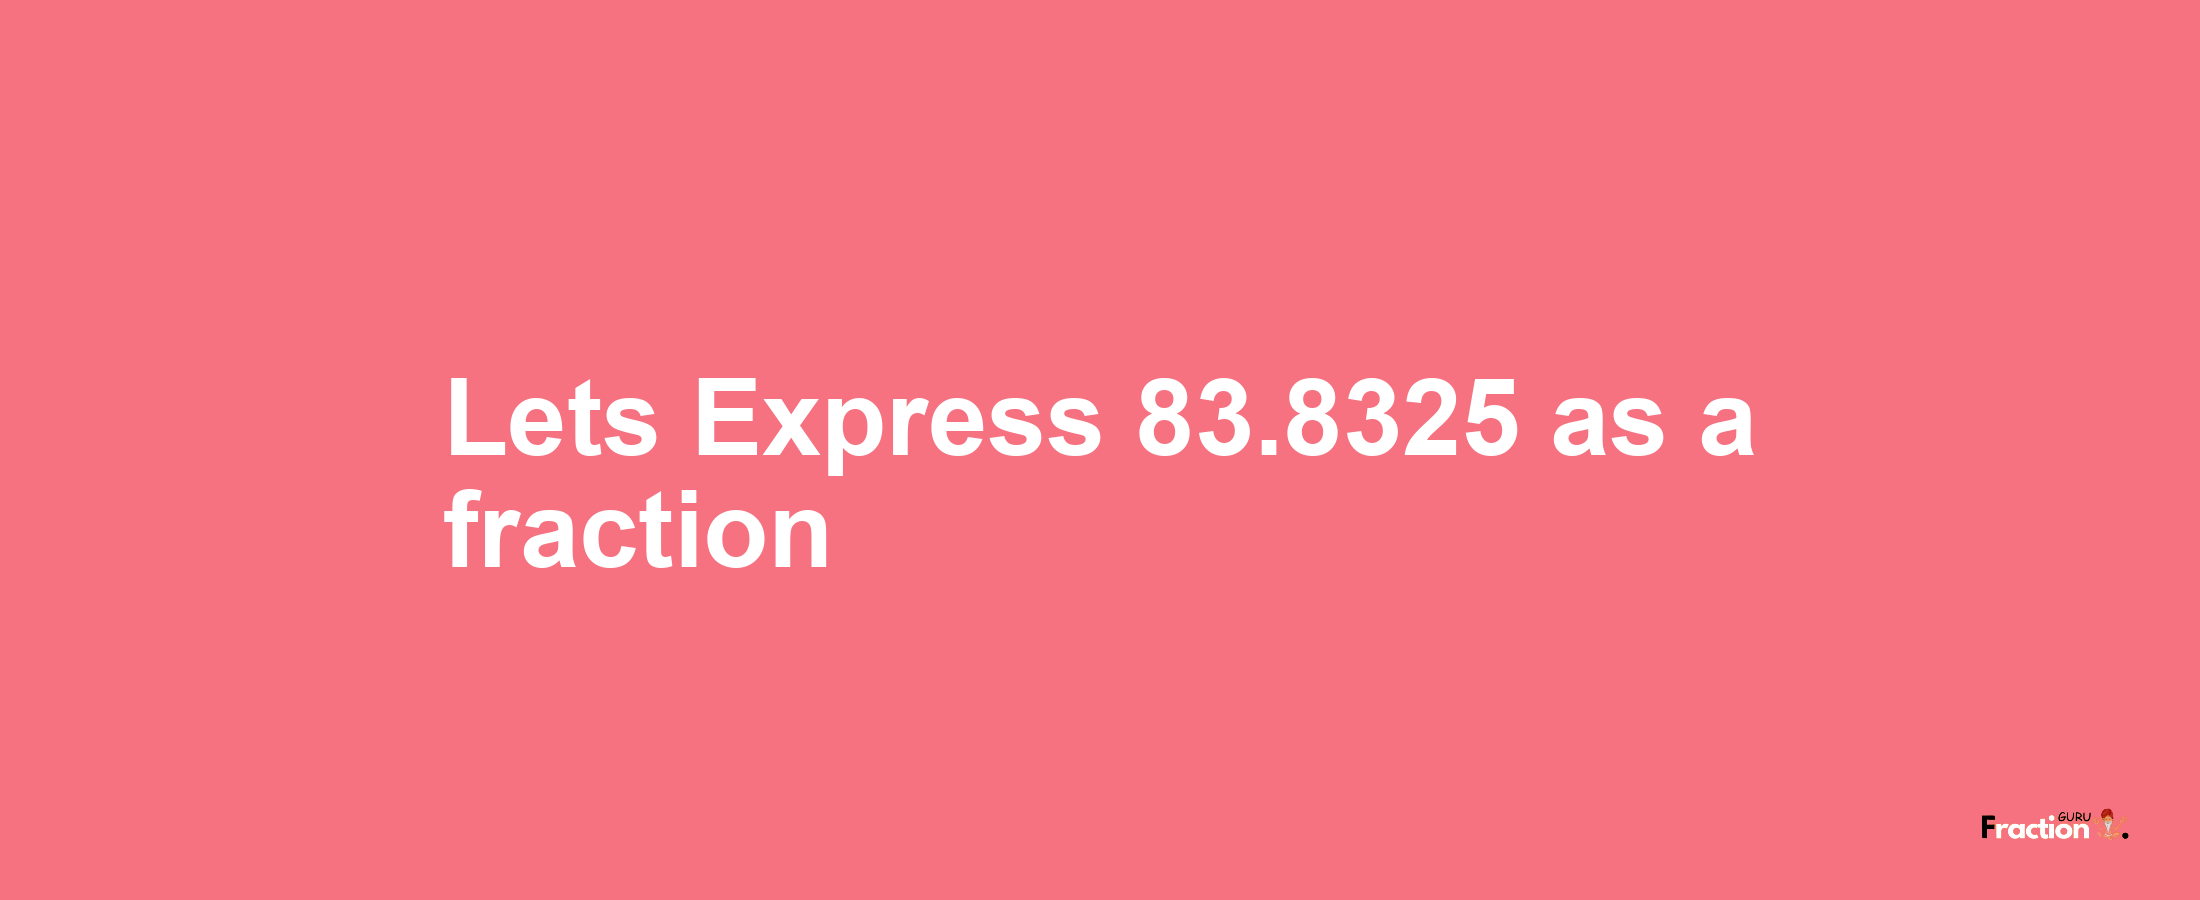 Lets Express 83.8325 as afraction